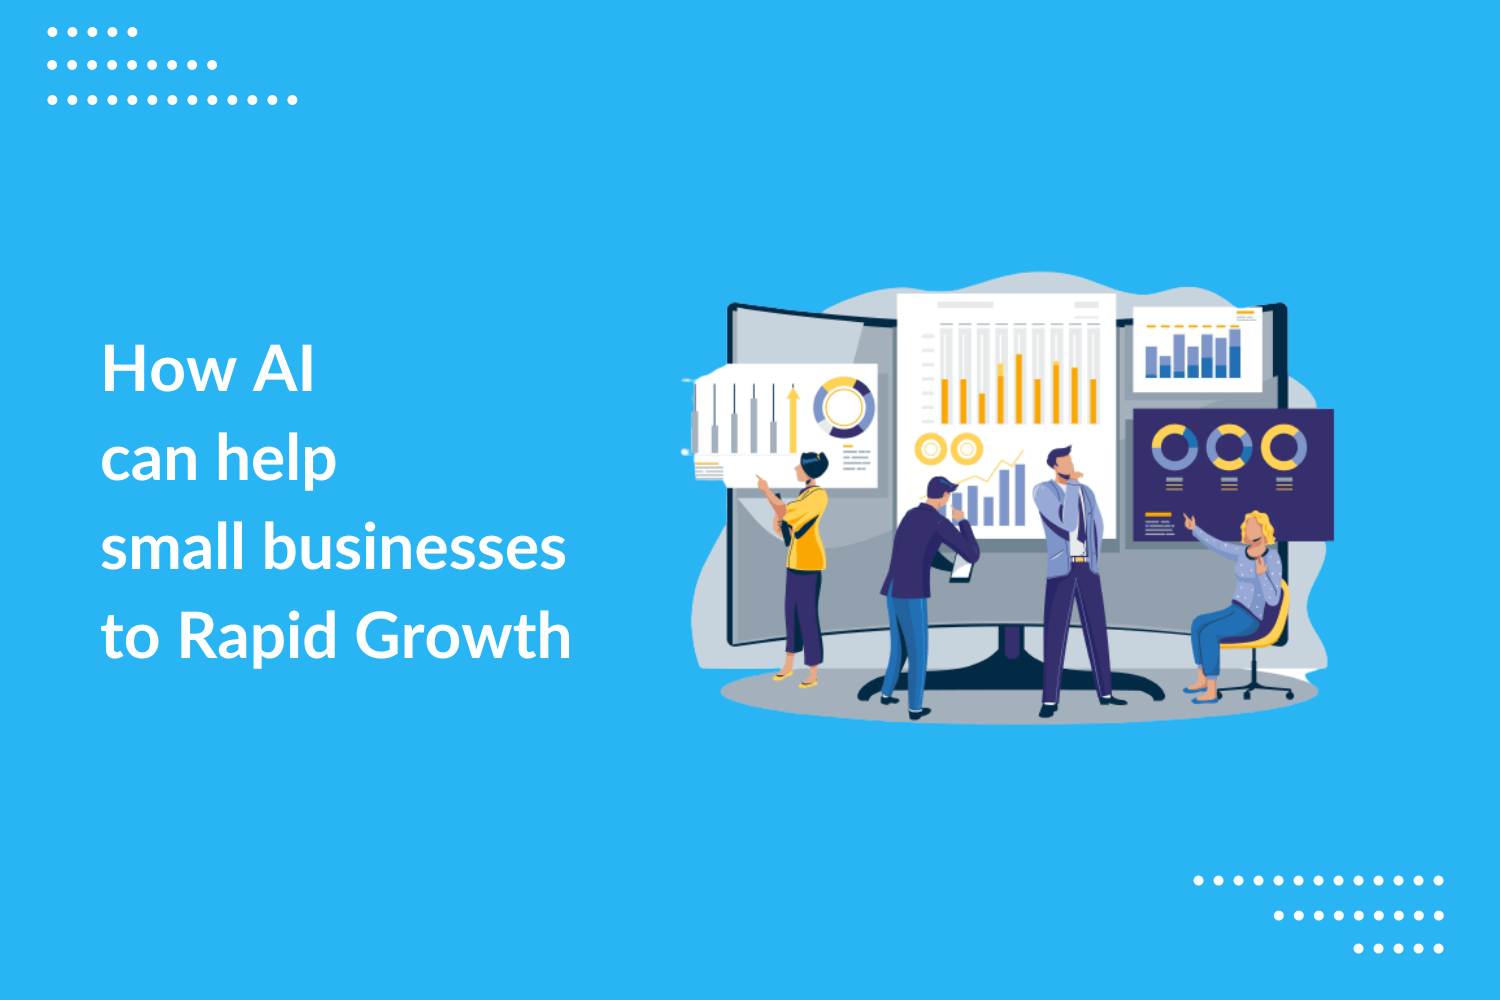 How AI can help small businesses to Rapid Growth